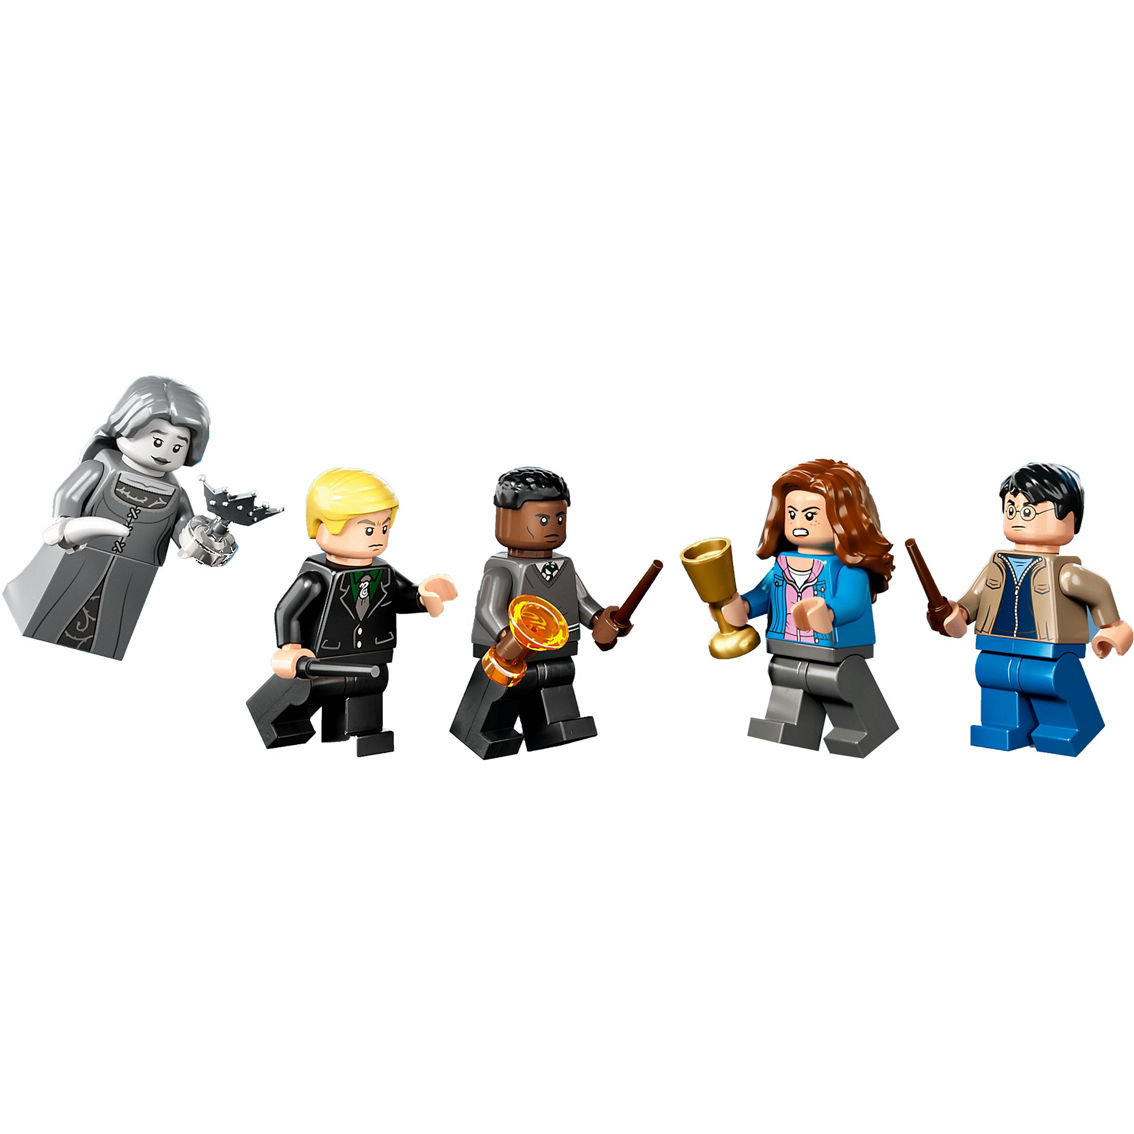 LEGO Harry Potter Hogwarts: Room of Requirement Toy 76413 - Image 9 of 9